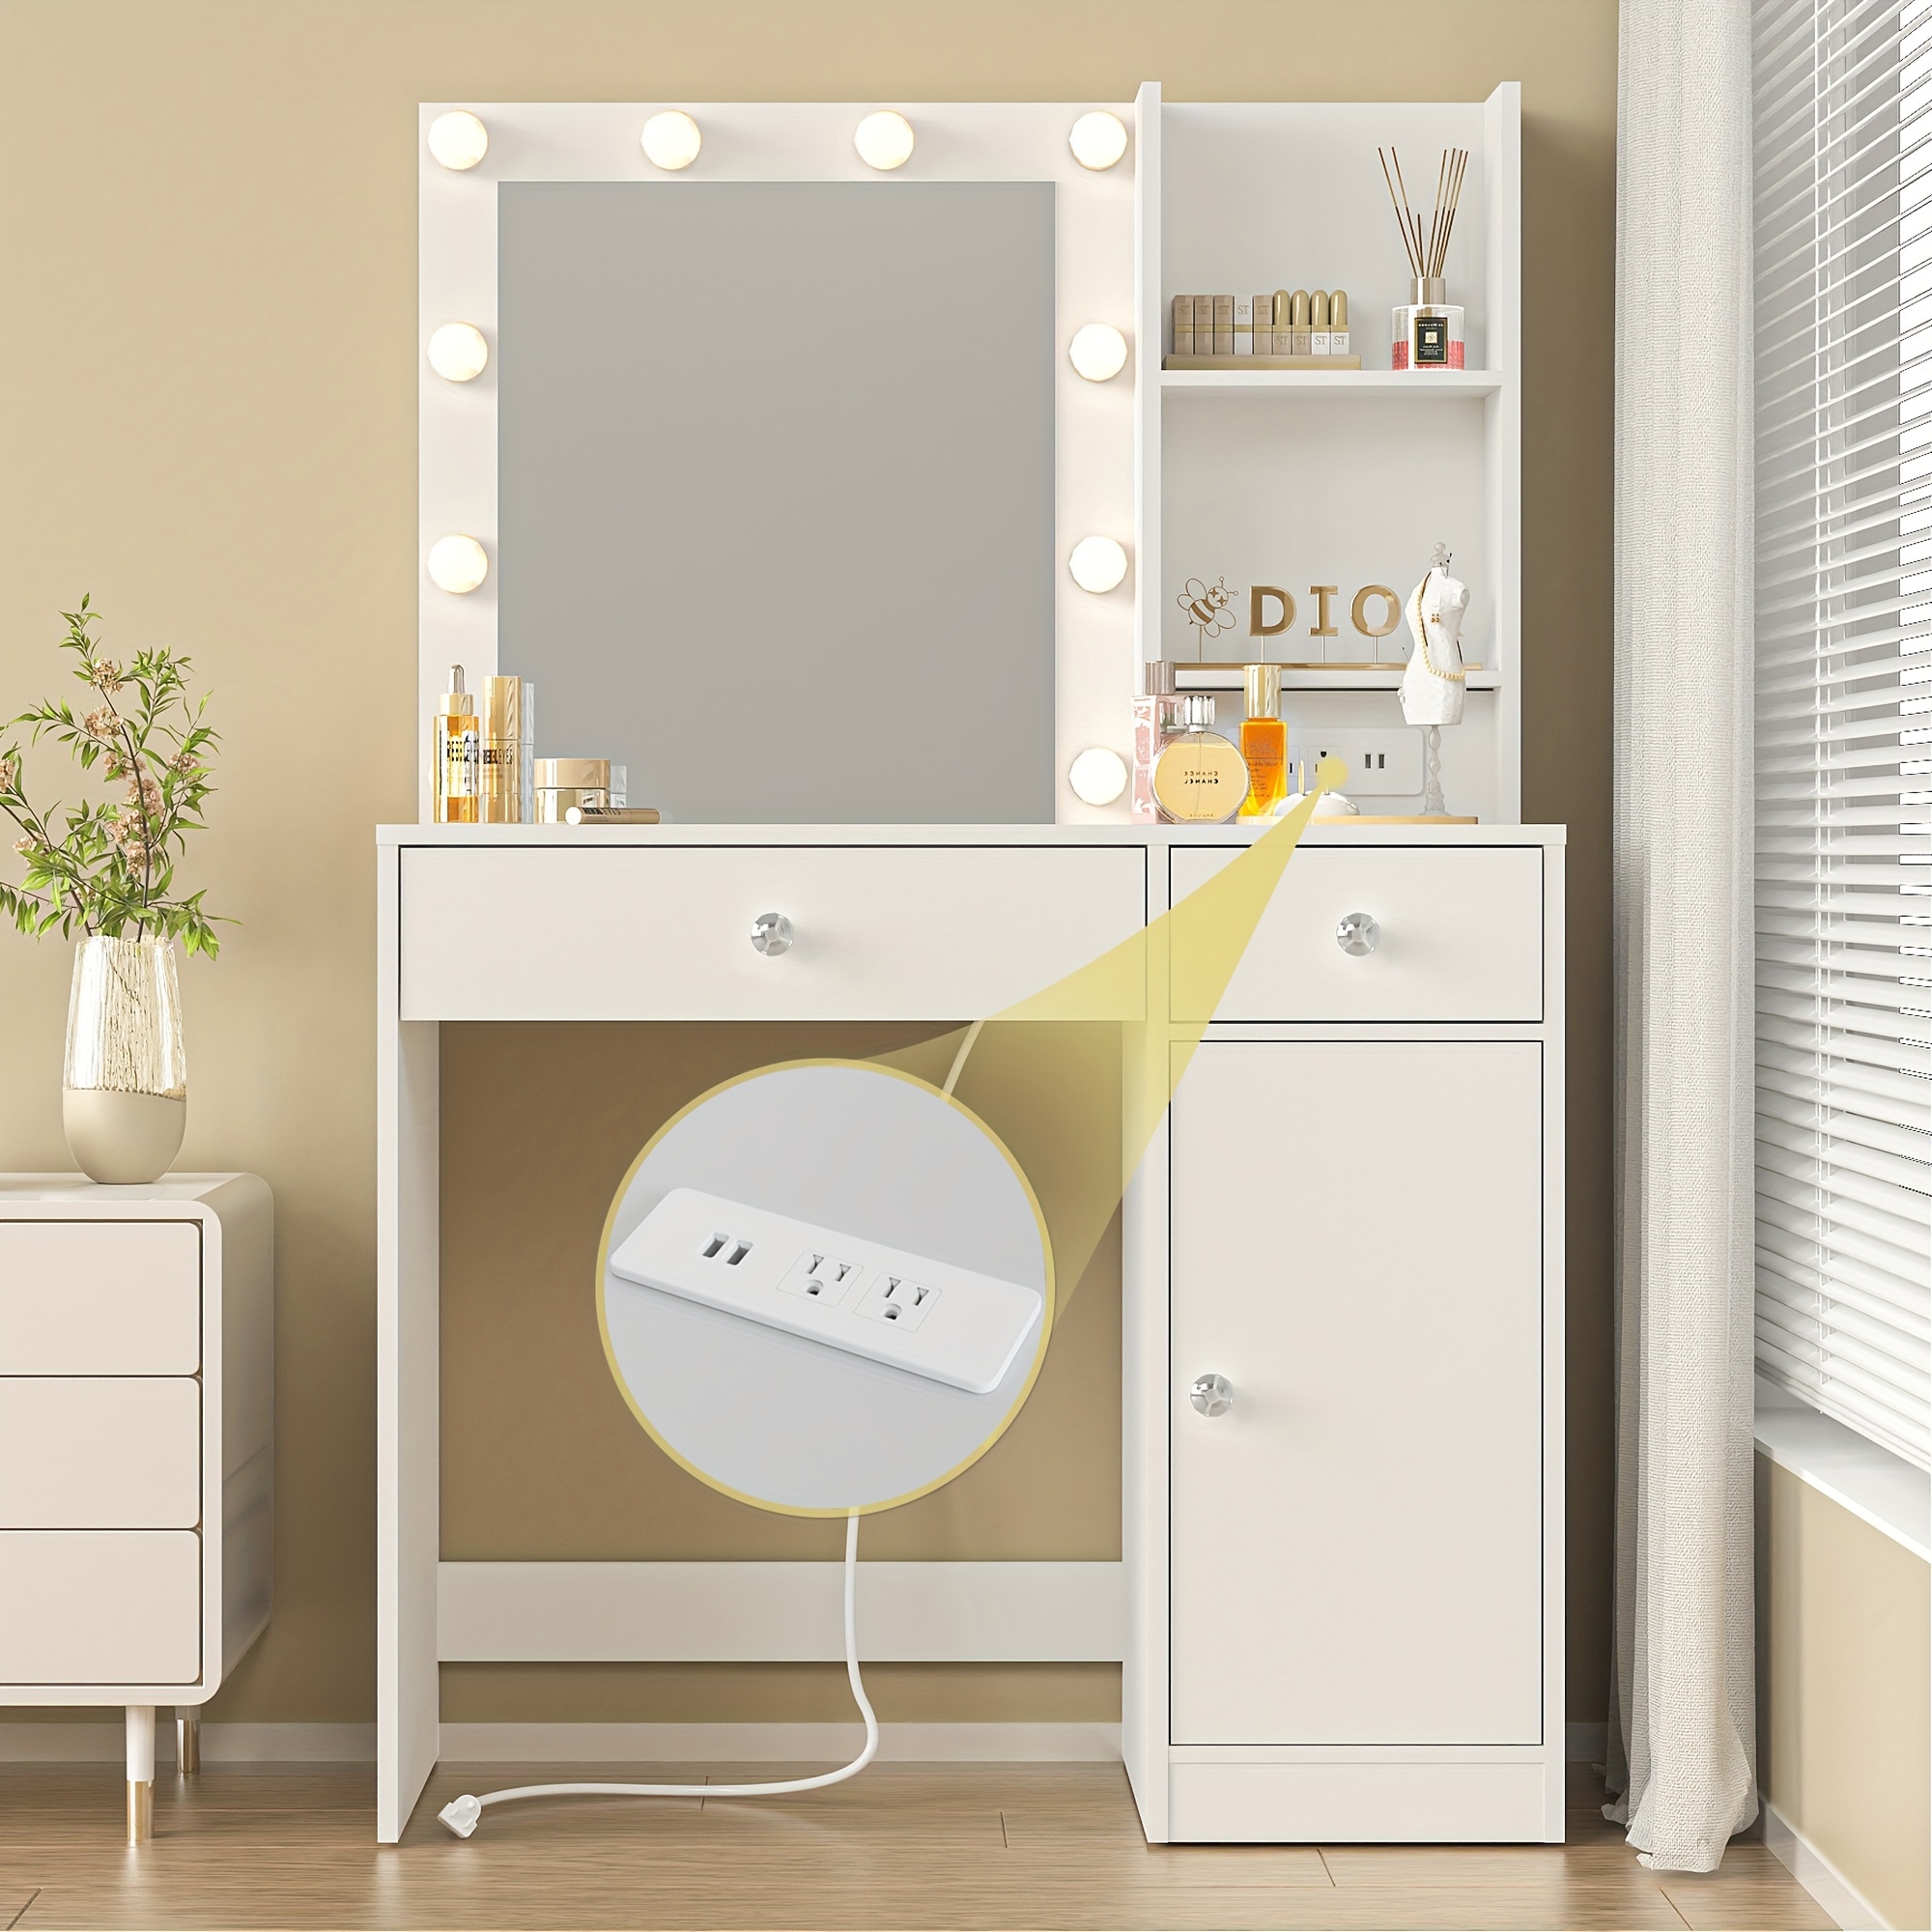 

Vanity Desk With Mirror And Light, 35 Inch Make Up Vanity With Power Outlets, Dressing Table Makeup Desk With Drawers And Cabinet, 3 Lighting Modes, Dressing Table For Bedroom, White